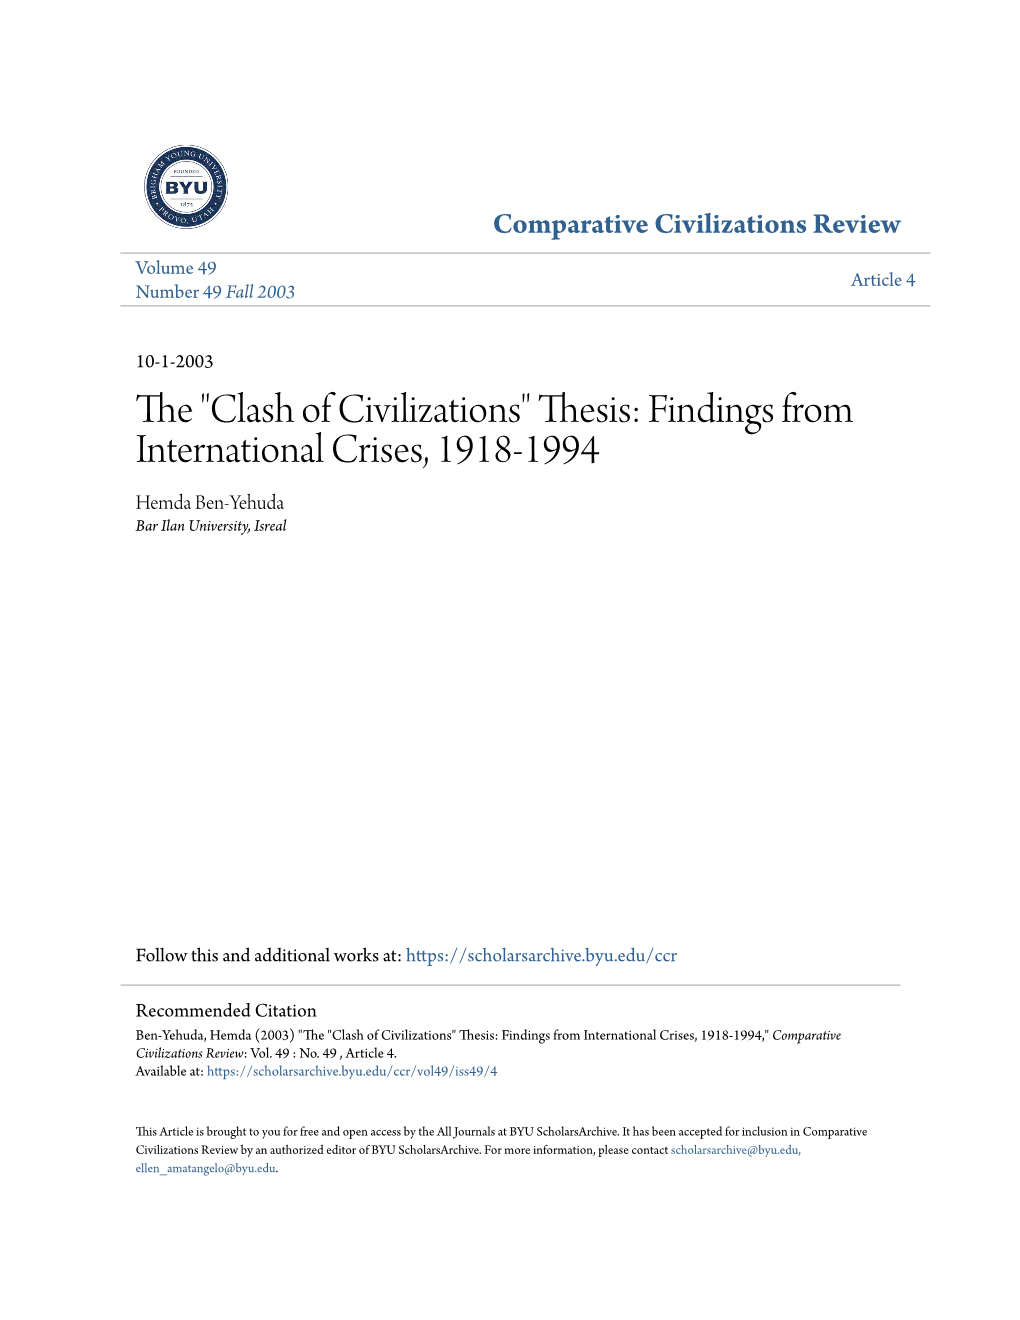 "Clash of Civilizations" Thesis: Findings from International 28 Comparative Civilizations Reviewno